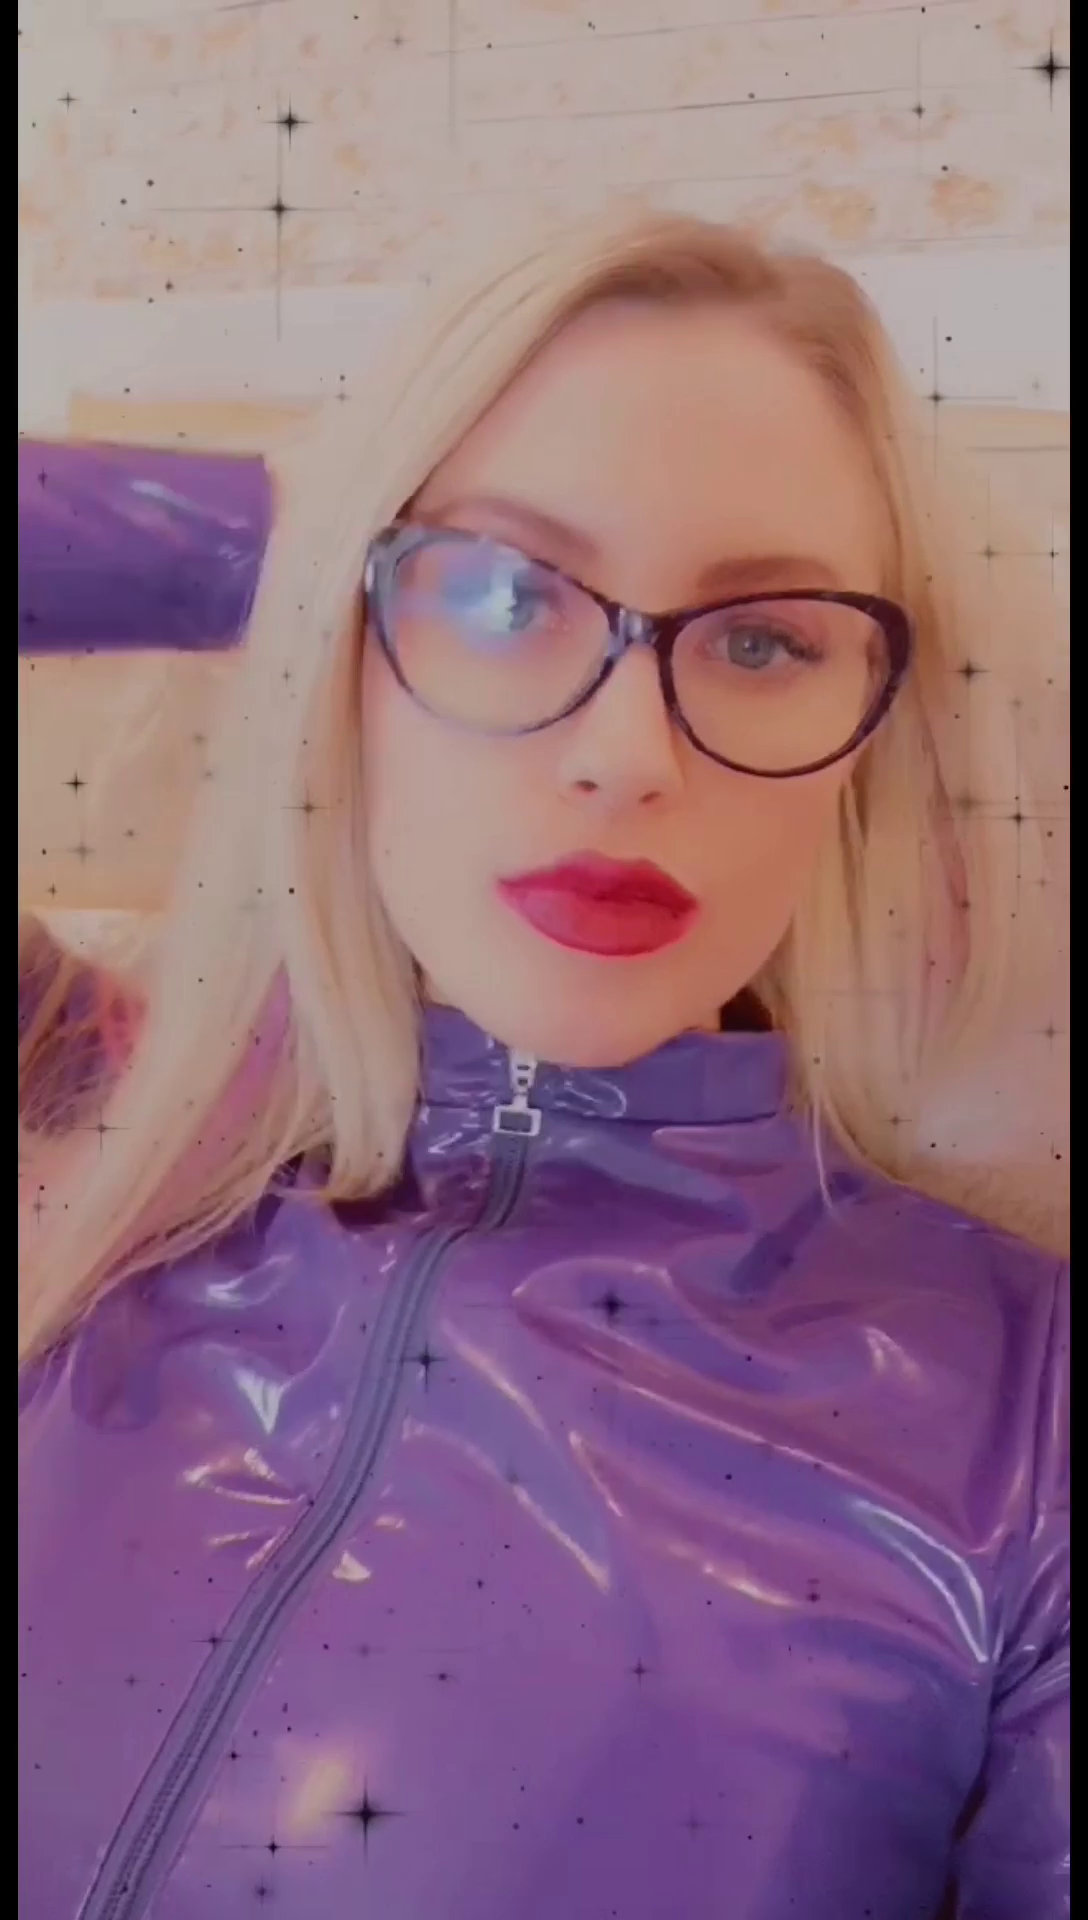 Video by Hypnoticnatalie with the username @Hypnoticnatalie, who is a star user,  November 21, 2020 at 1:50 PM. The post is about the topic FEMDOM WORSHIP and the text says 'What's your plans for the weekend? I'll tell you what you're doing, bitch boy! Gooning for me! Edging! Binging! Stroking! Turning into a drone! Drooling! Edging again! Get busy!
https://iwantgoddessnatalie.com'